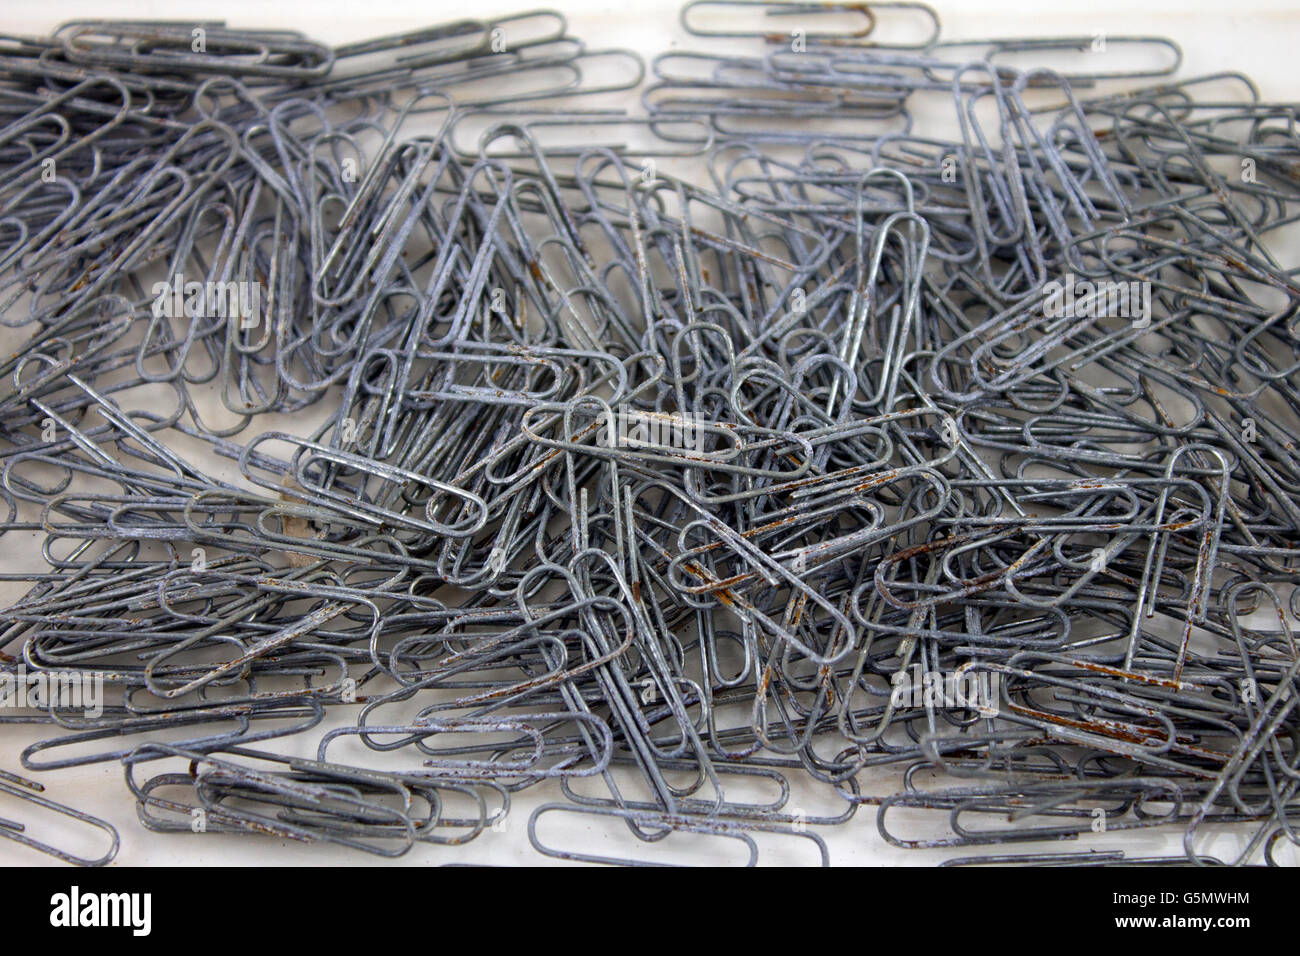 Pile of paper clips Stock Photo